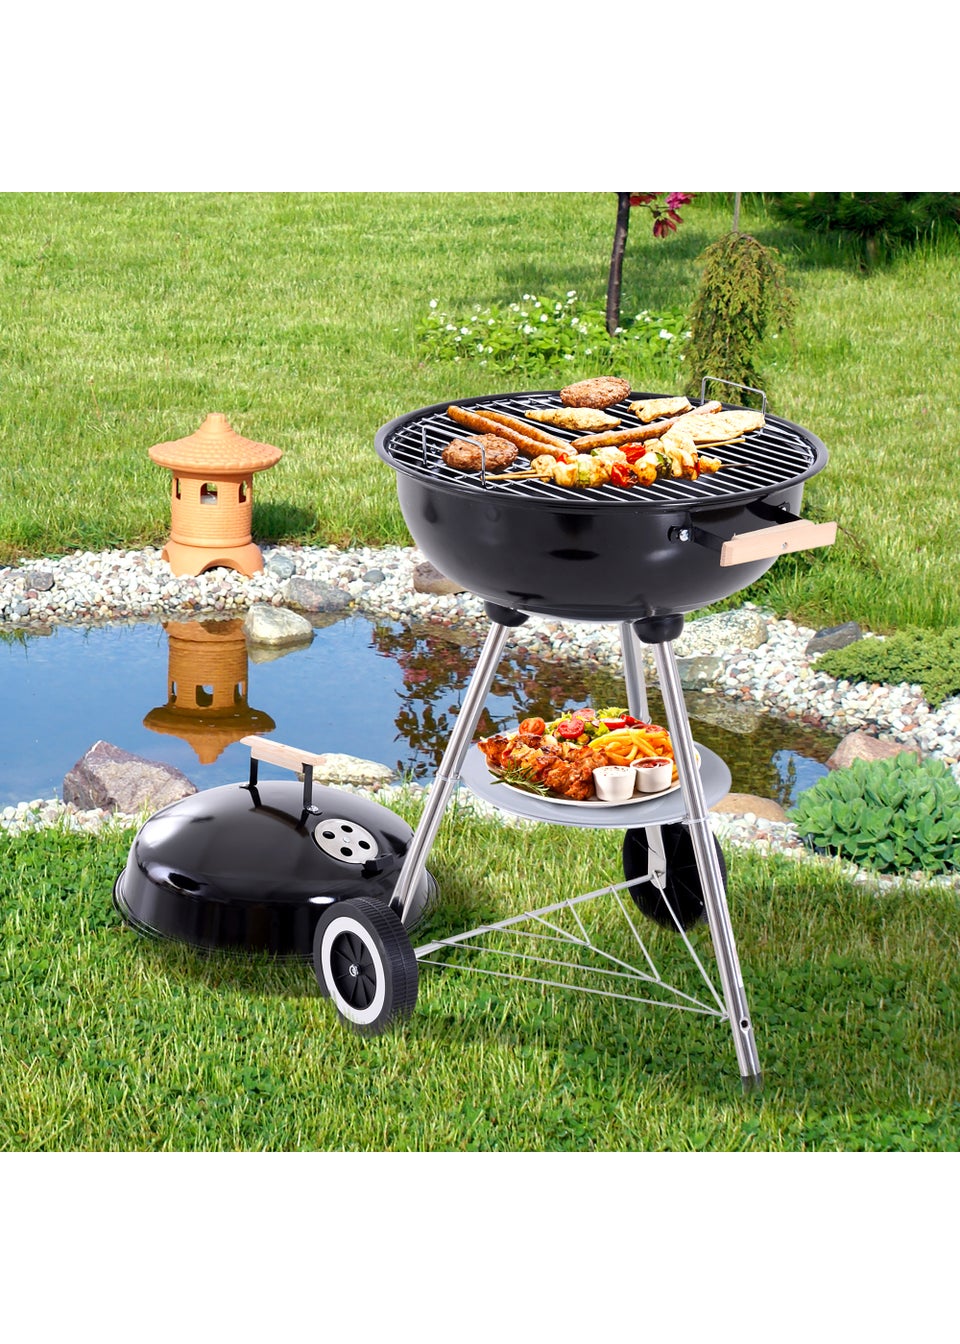 Outsunny Portable Round Kettle Charcoal Grill BBQ Smoker with Lid